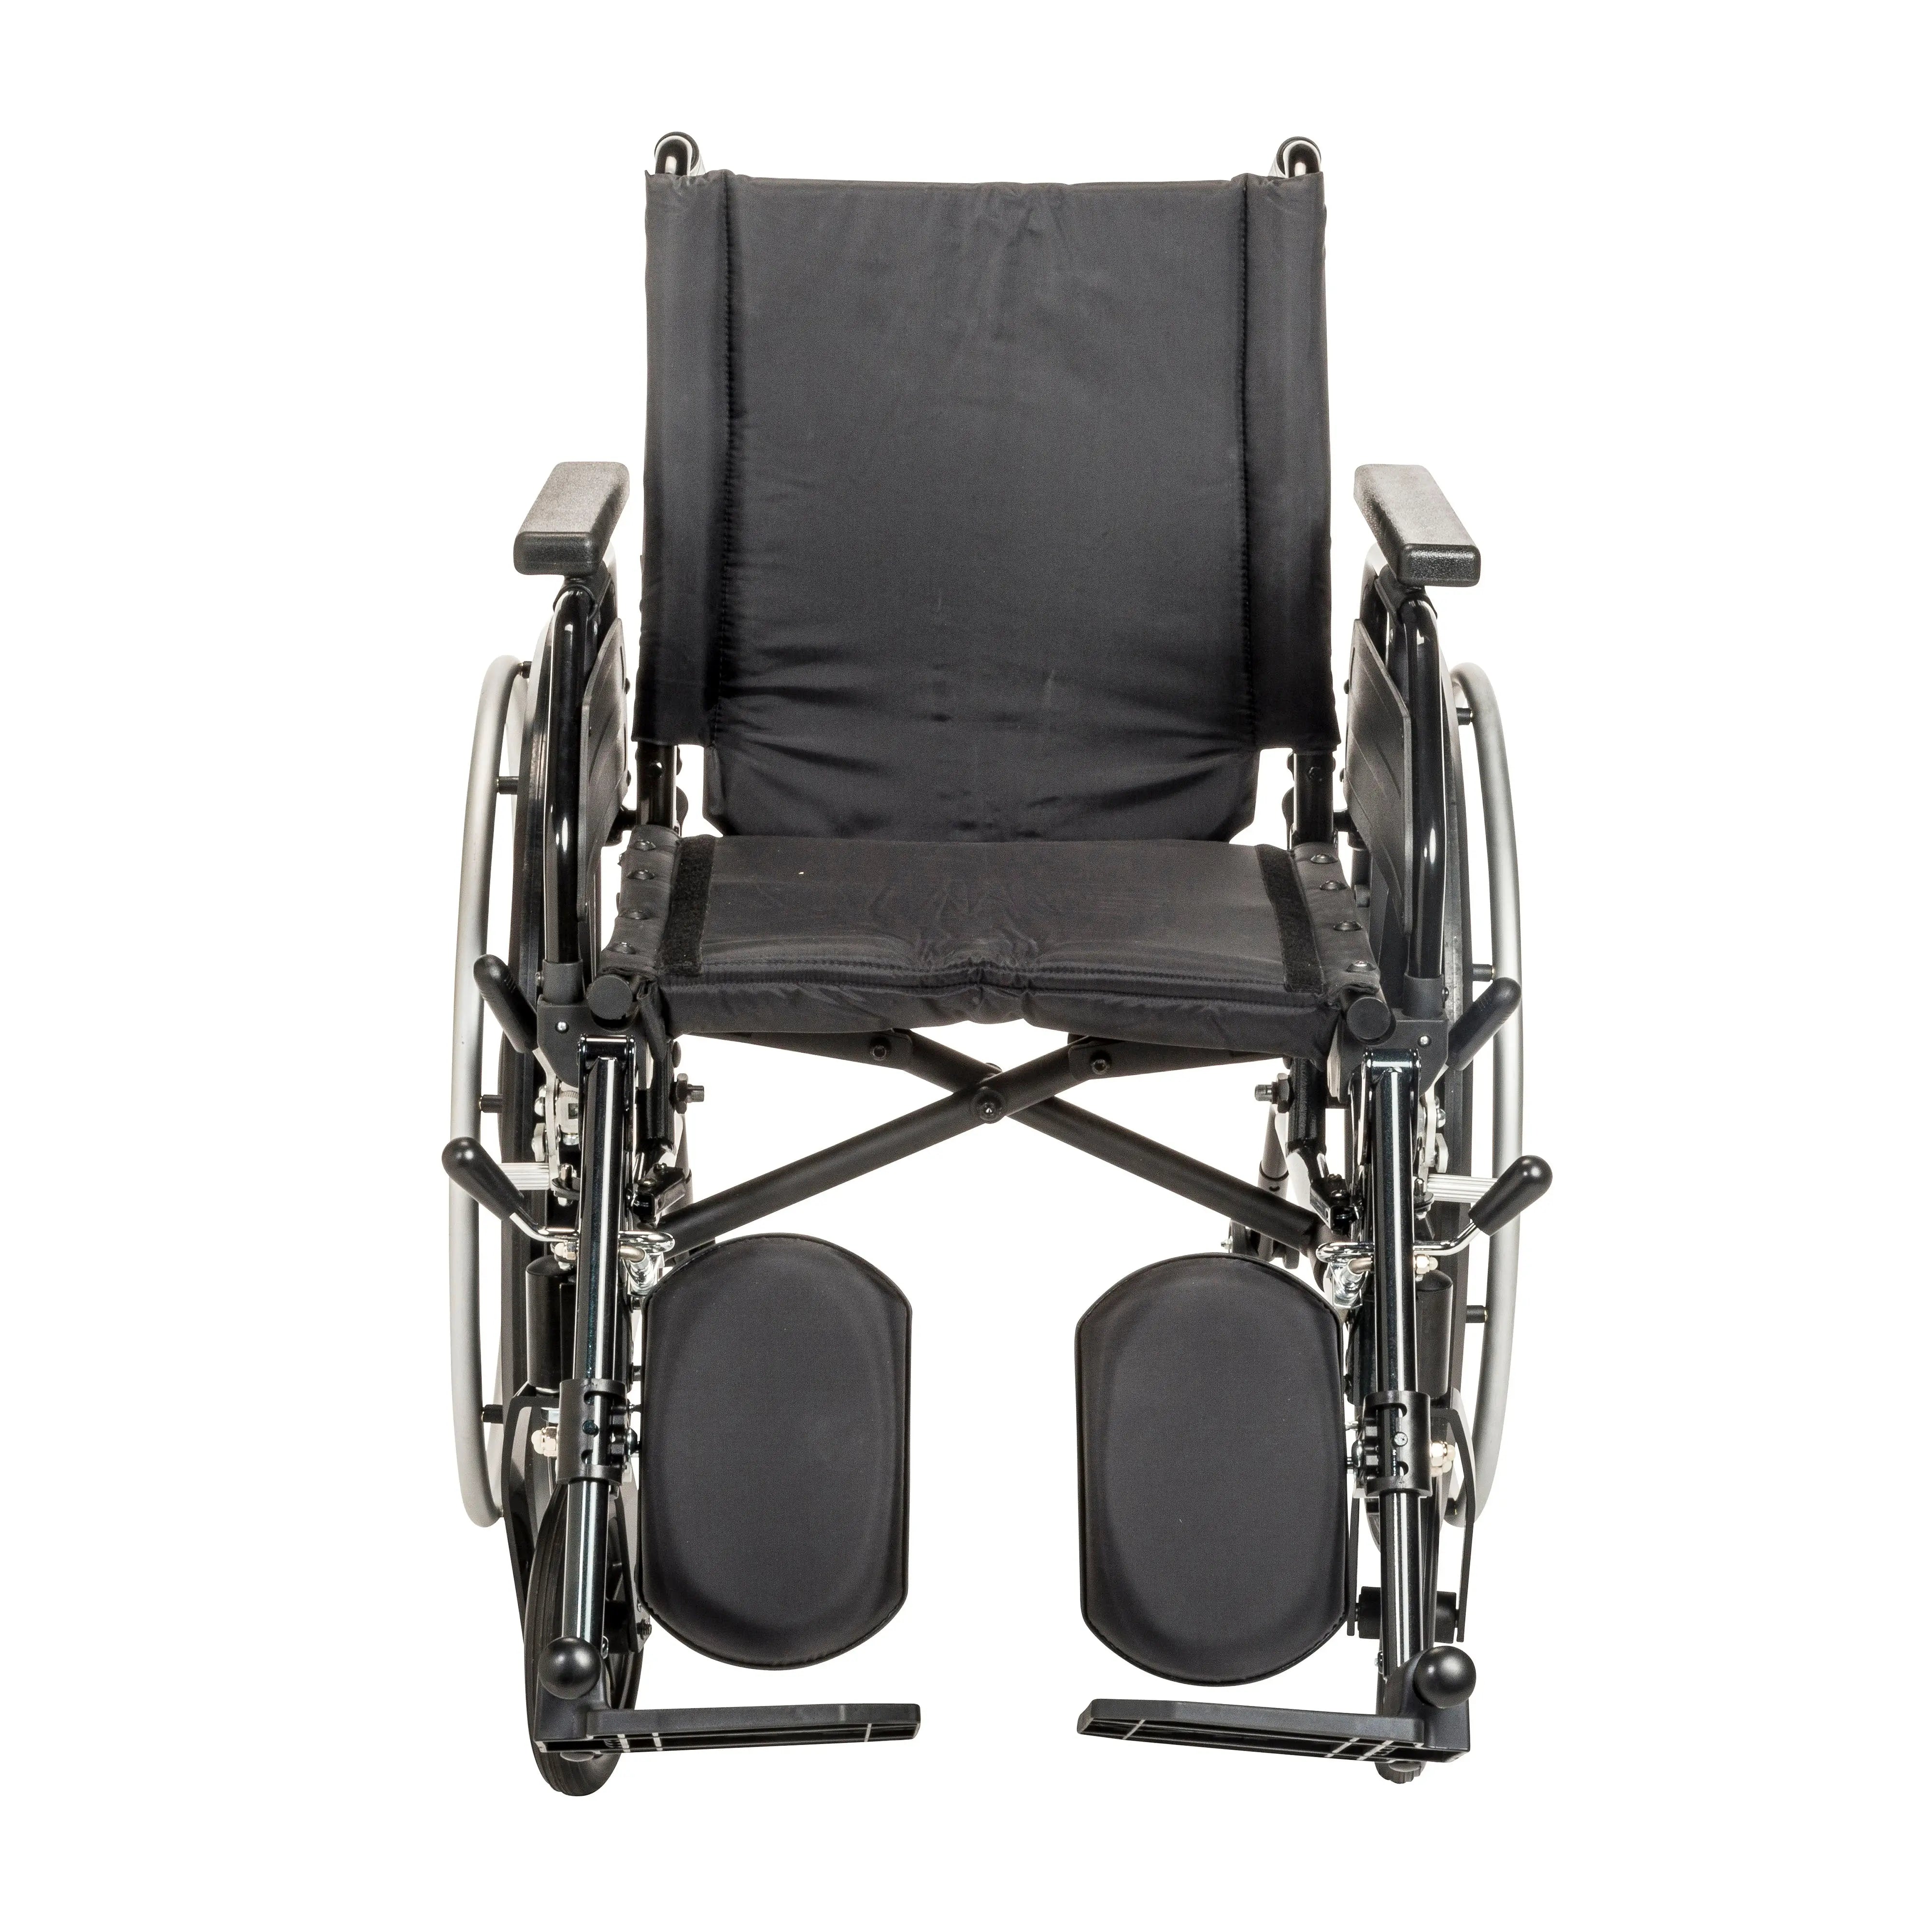 Viper Plus GT Wheelchair with Universal Armrests - Home Health Store Inc